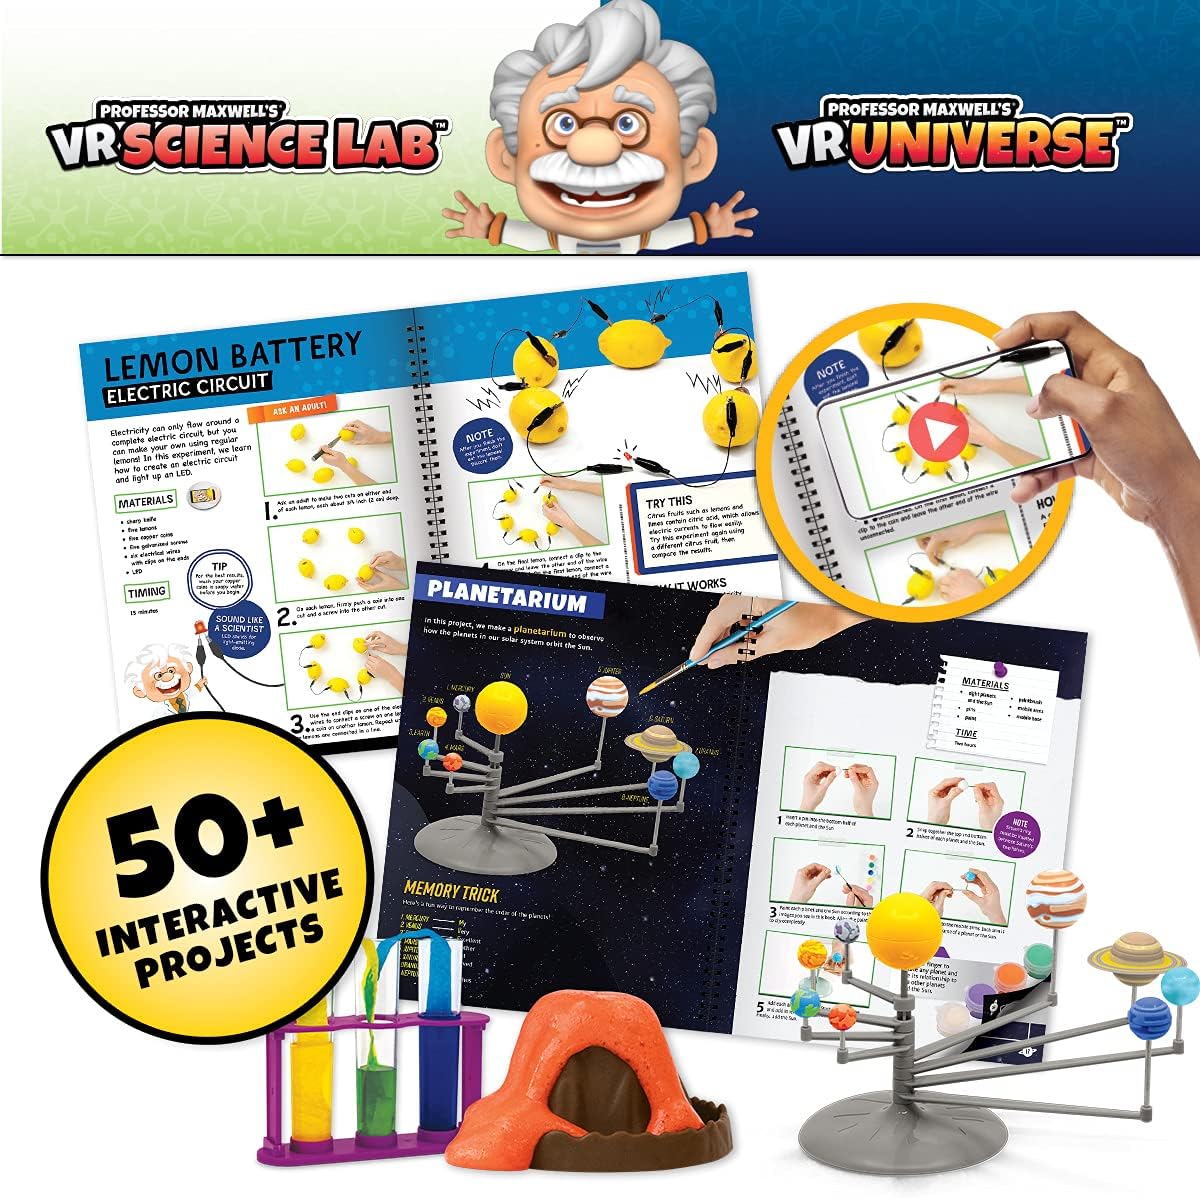 Professor Maxwell's Virtual Reality 2 in 1 Bundle Pack - VR Science Lab & Universe